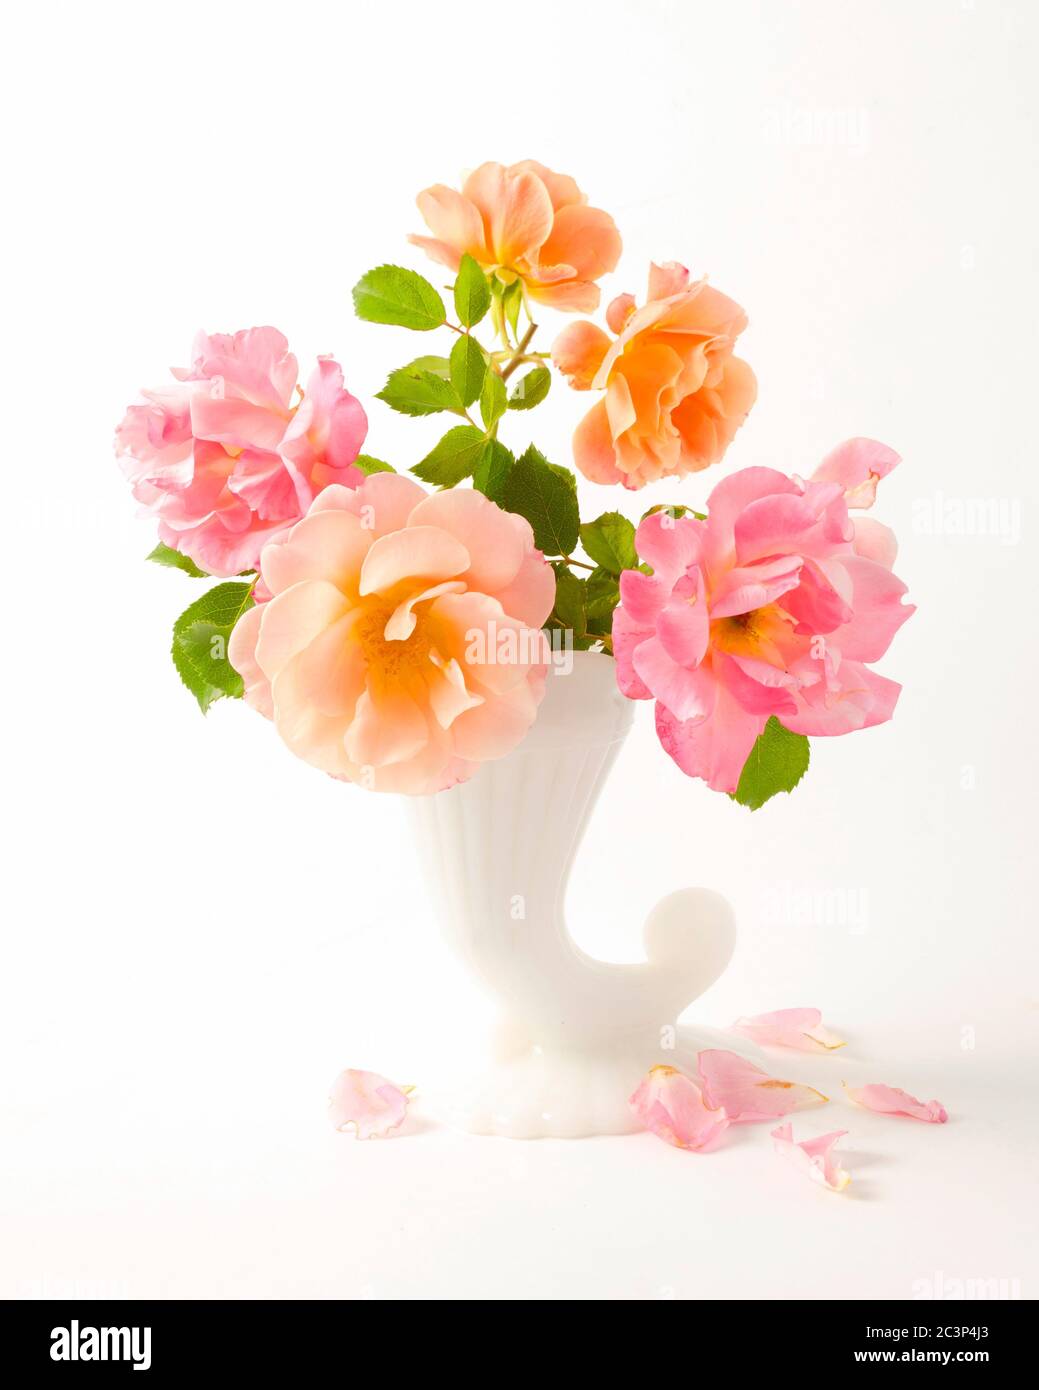 Pink and orange roses arranged in a white porcelain vase Stock Photo